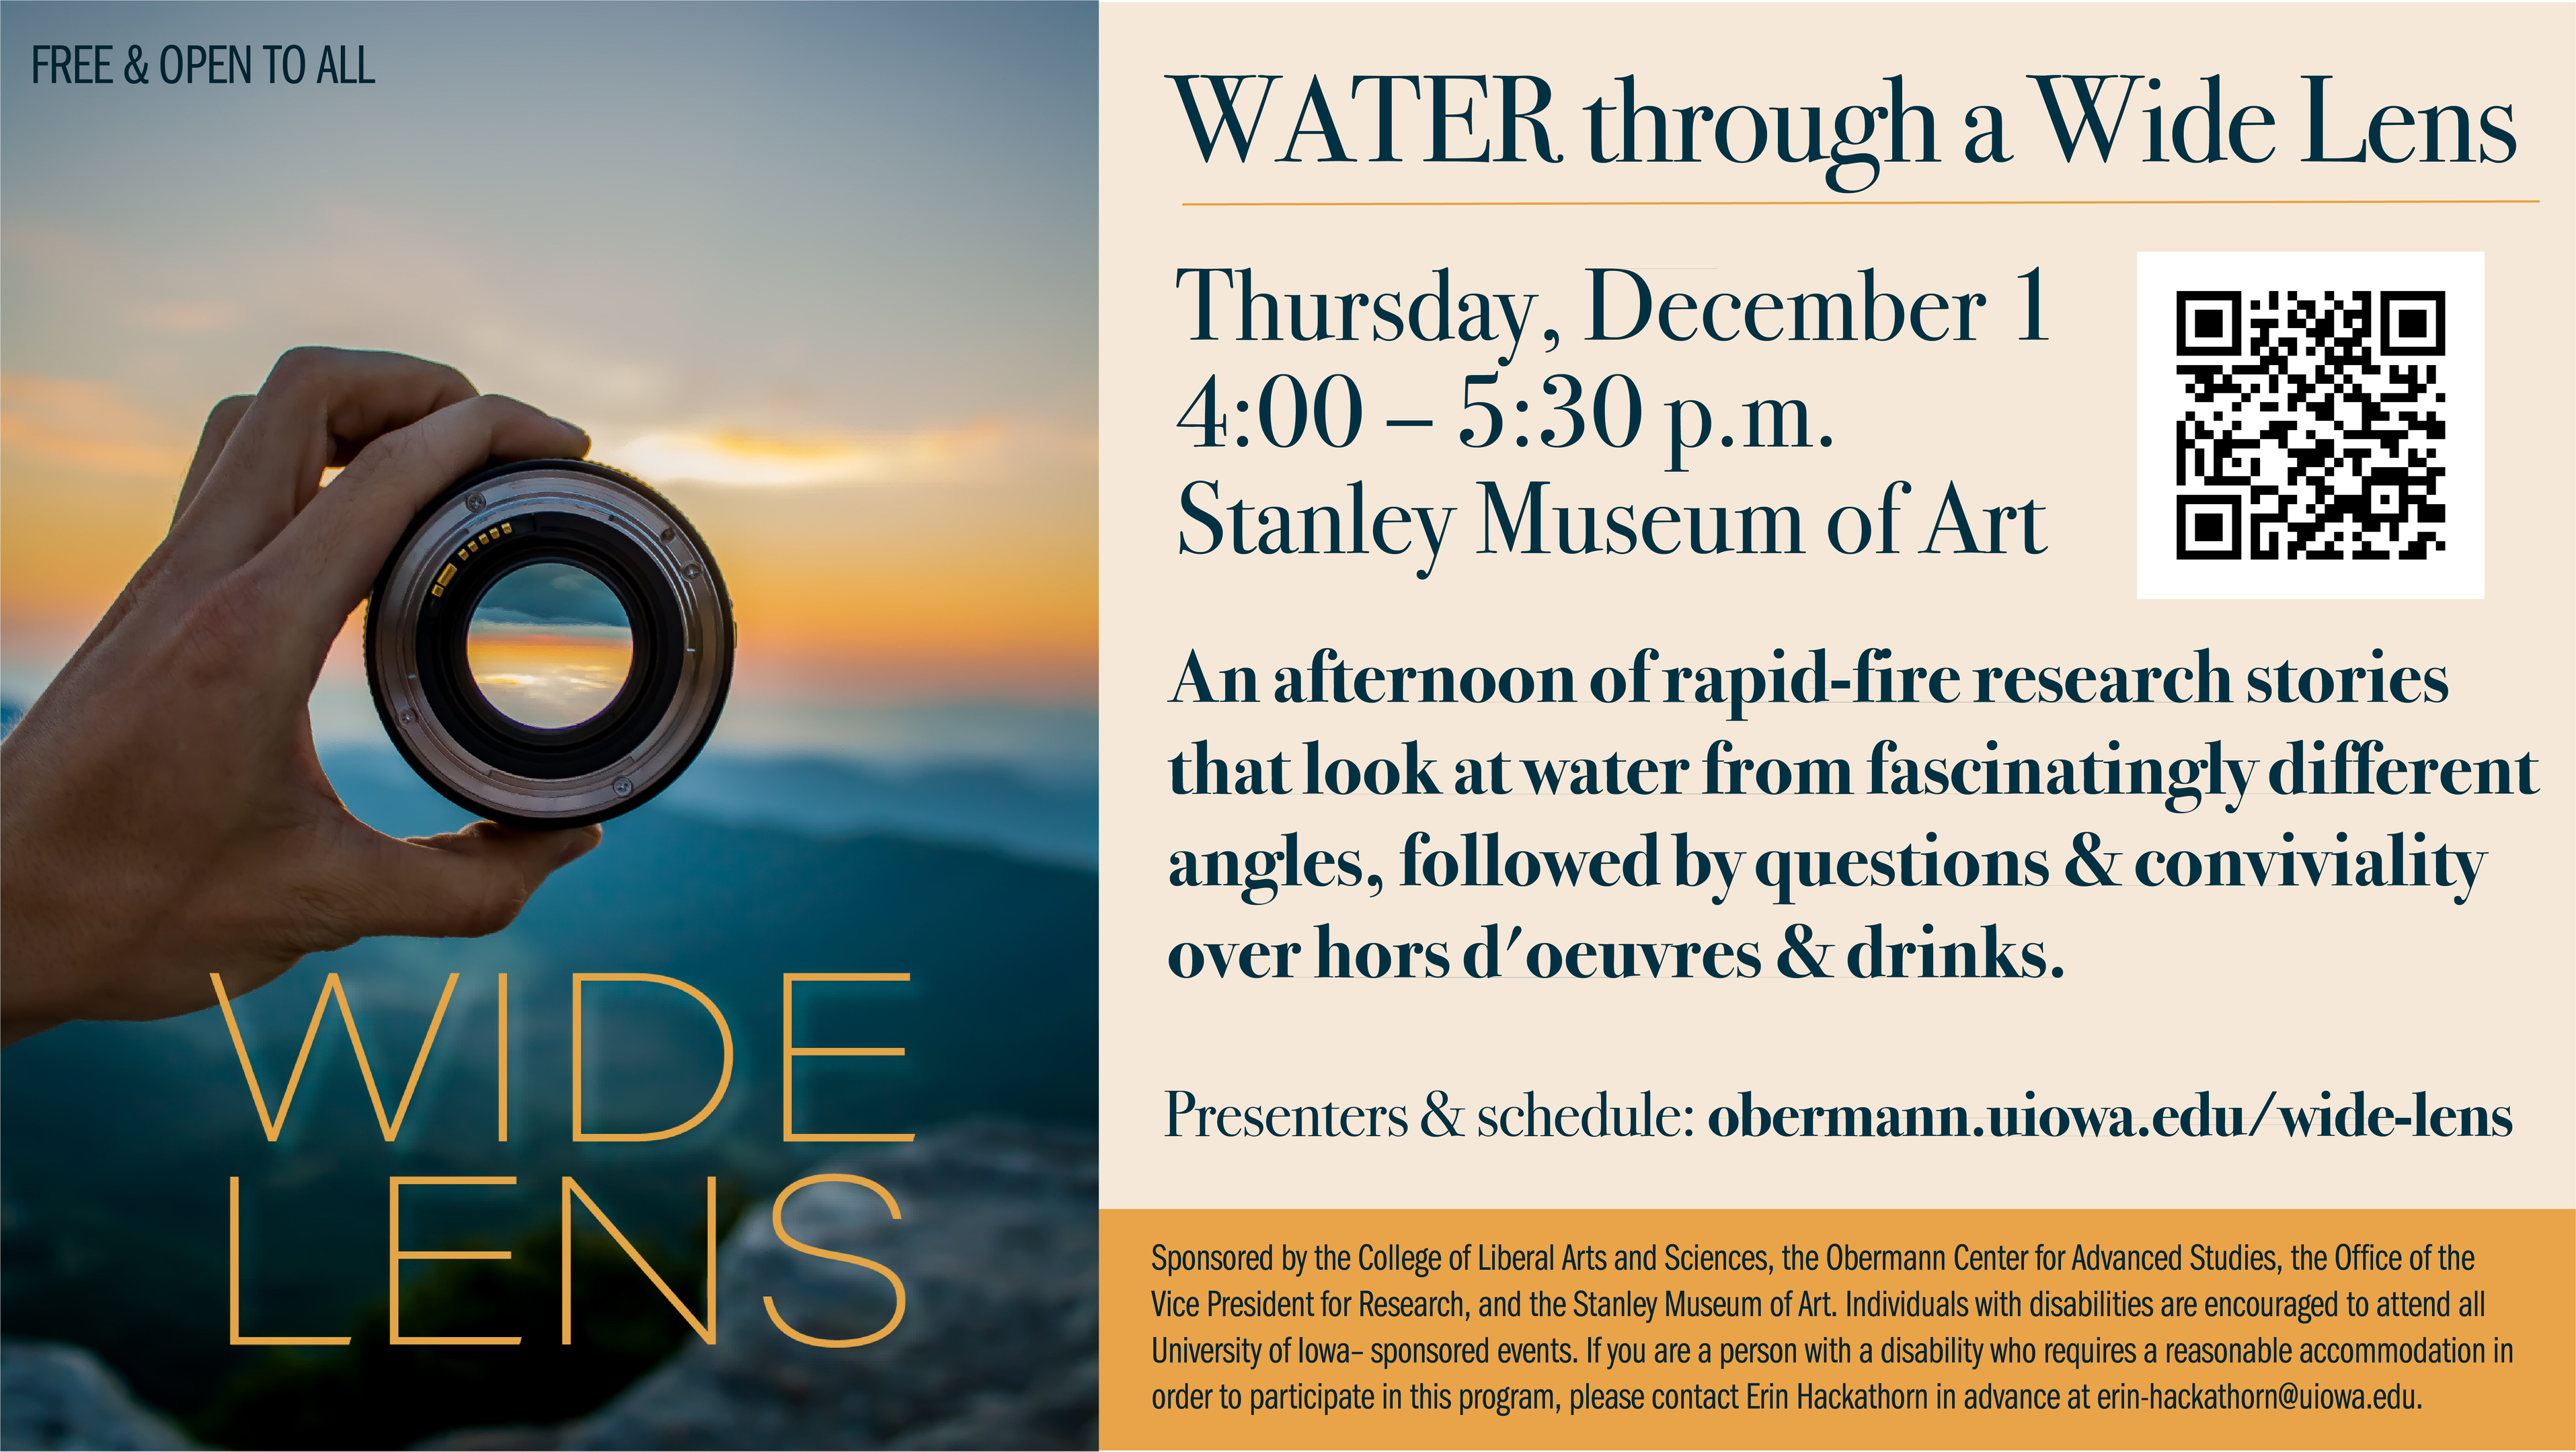 WATER through a Wide Lens – a series of rapid-fire research stories from different angles. Followed by Q&A. December 1, 4-5:30pm, Stanley Museum of Art